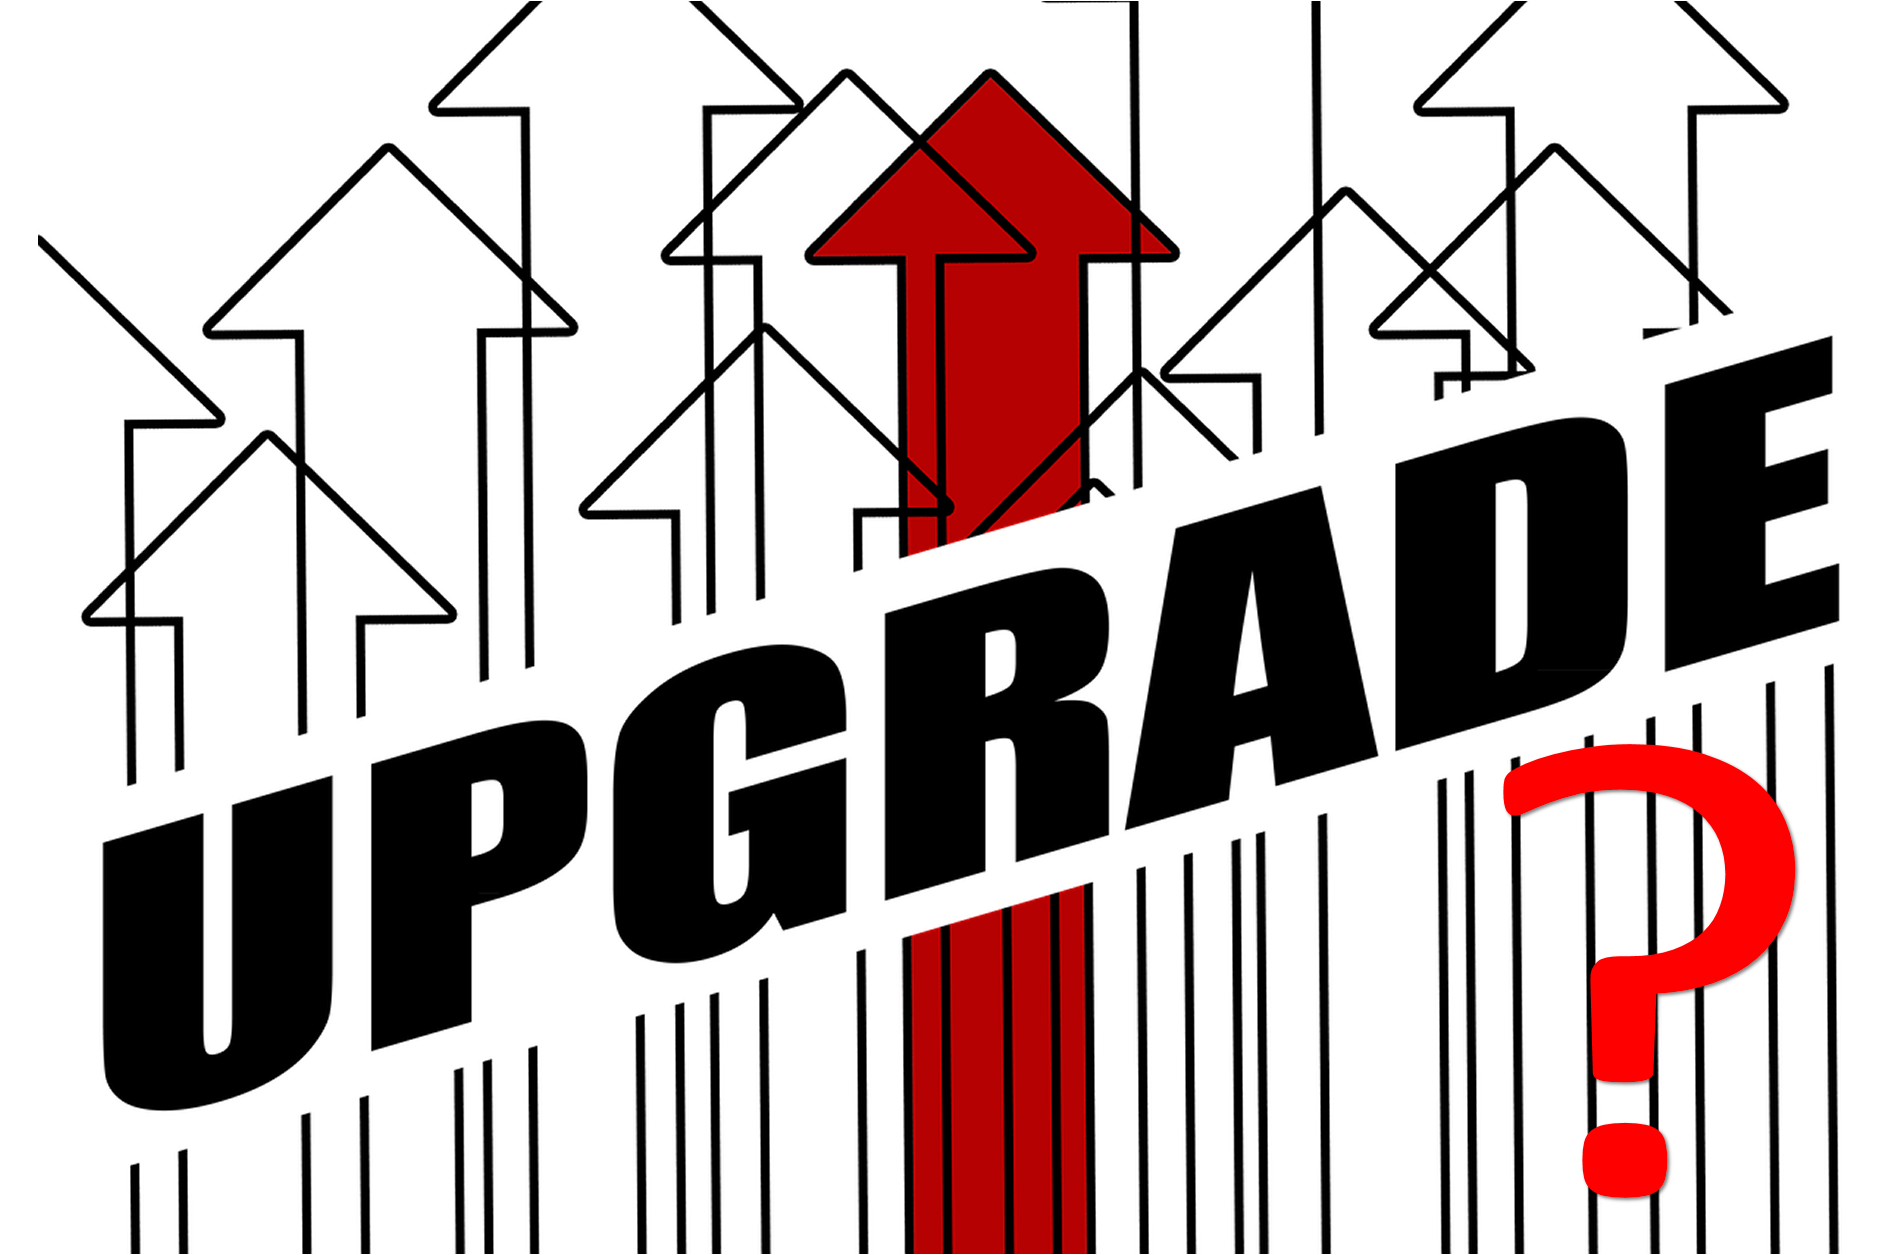 A red arrow pointing to the word upgrade.